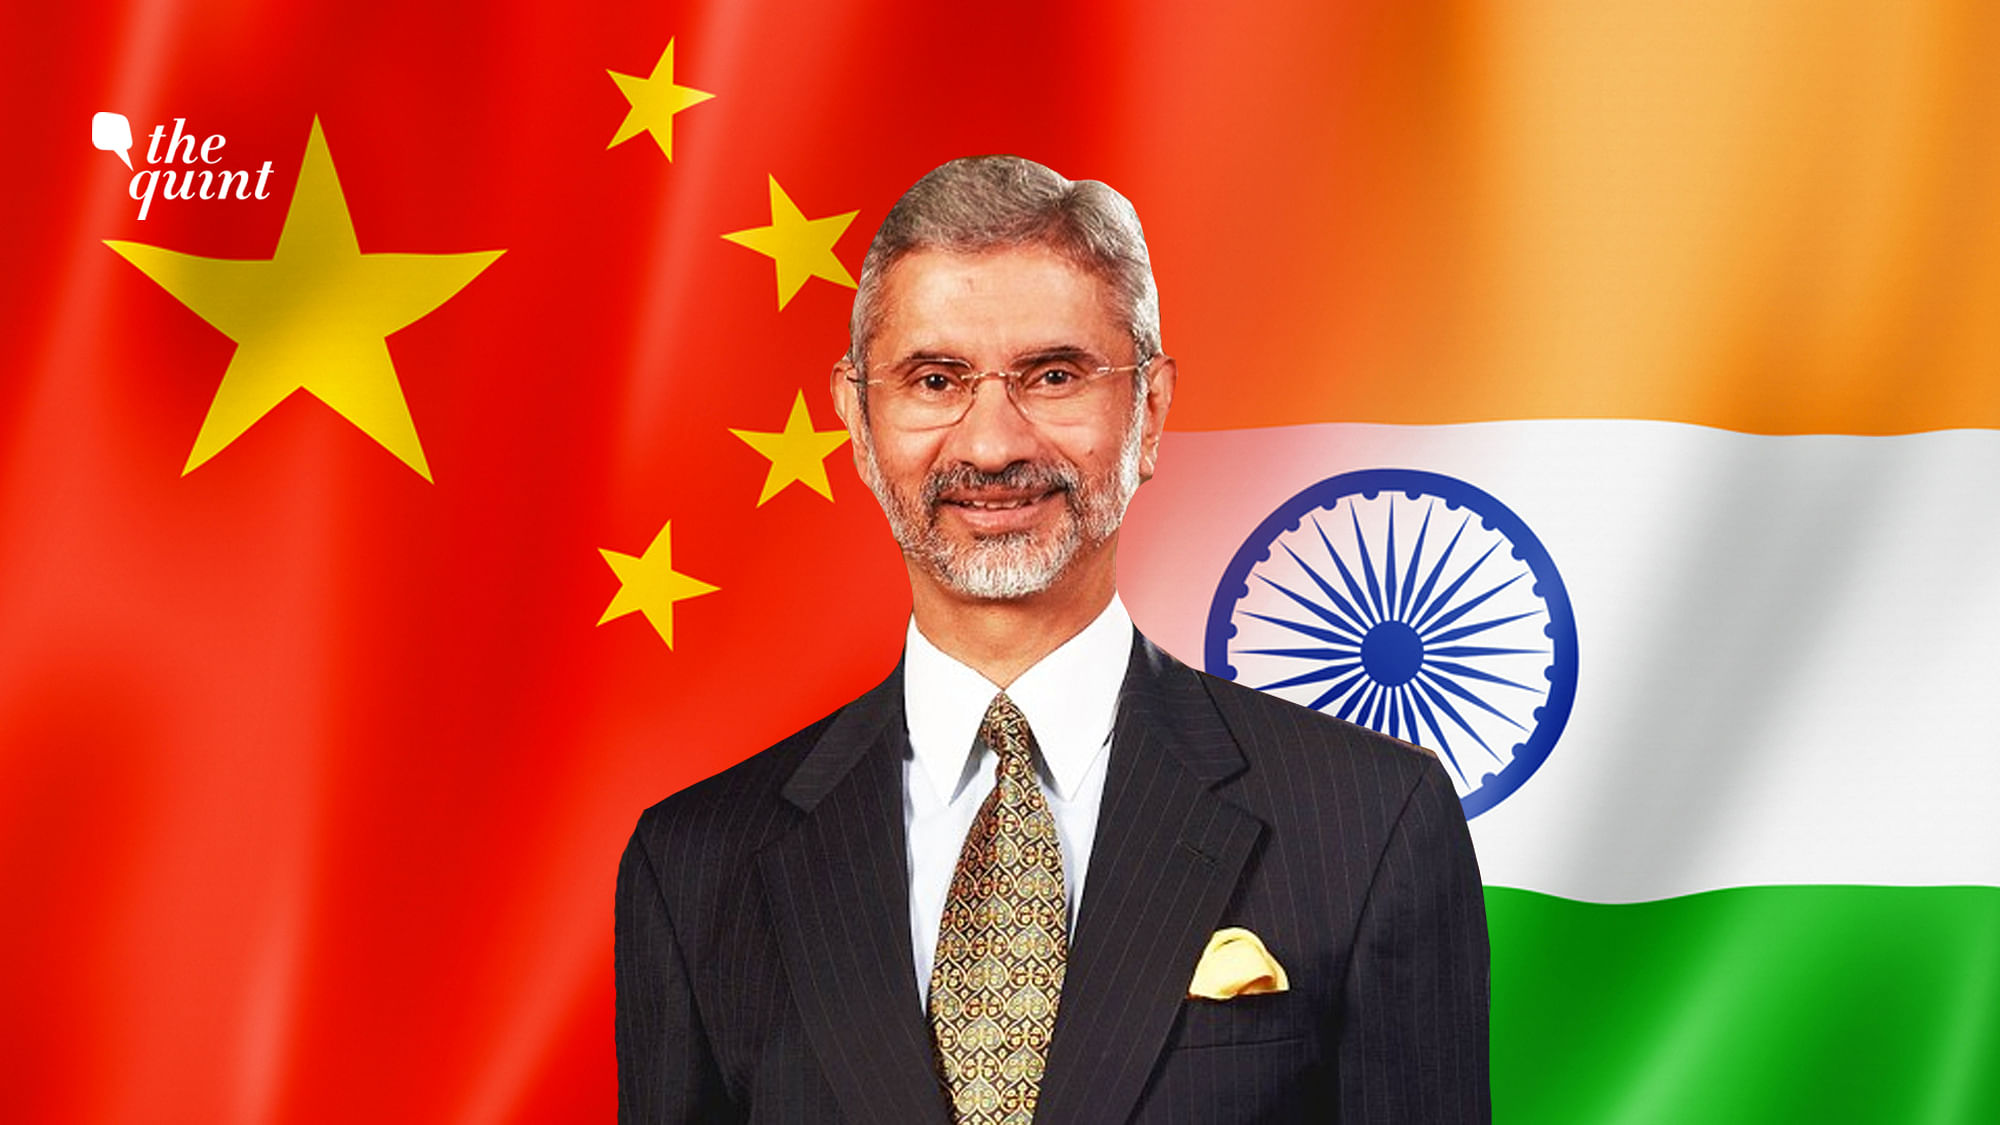 India-China relations or ties with the new US administration, can External Affairs minister S Jaishankar deliver as a politician?&nbsp;